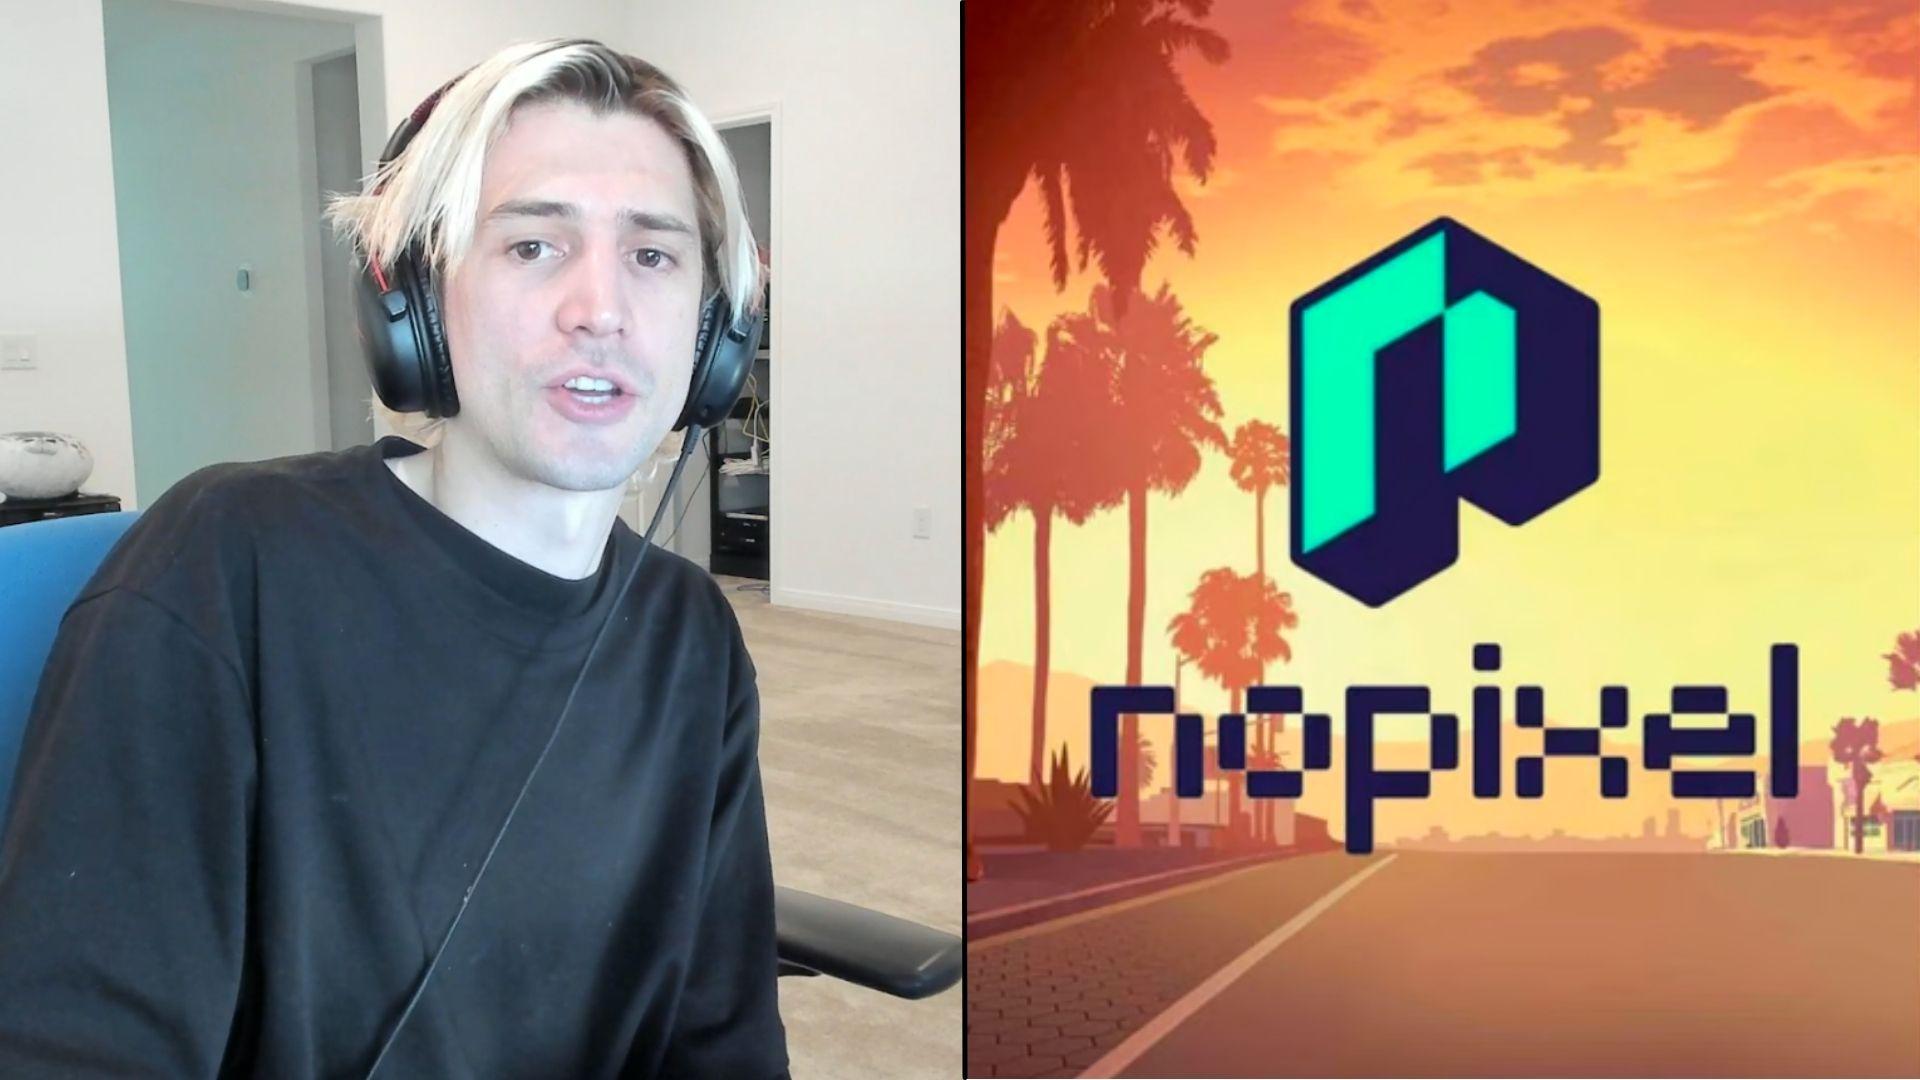 xQc looking at camera in black shirt side-by-side with nopixel logo